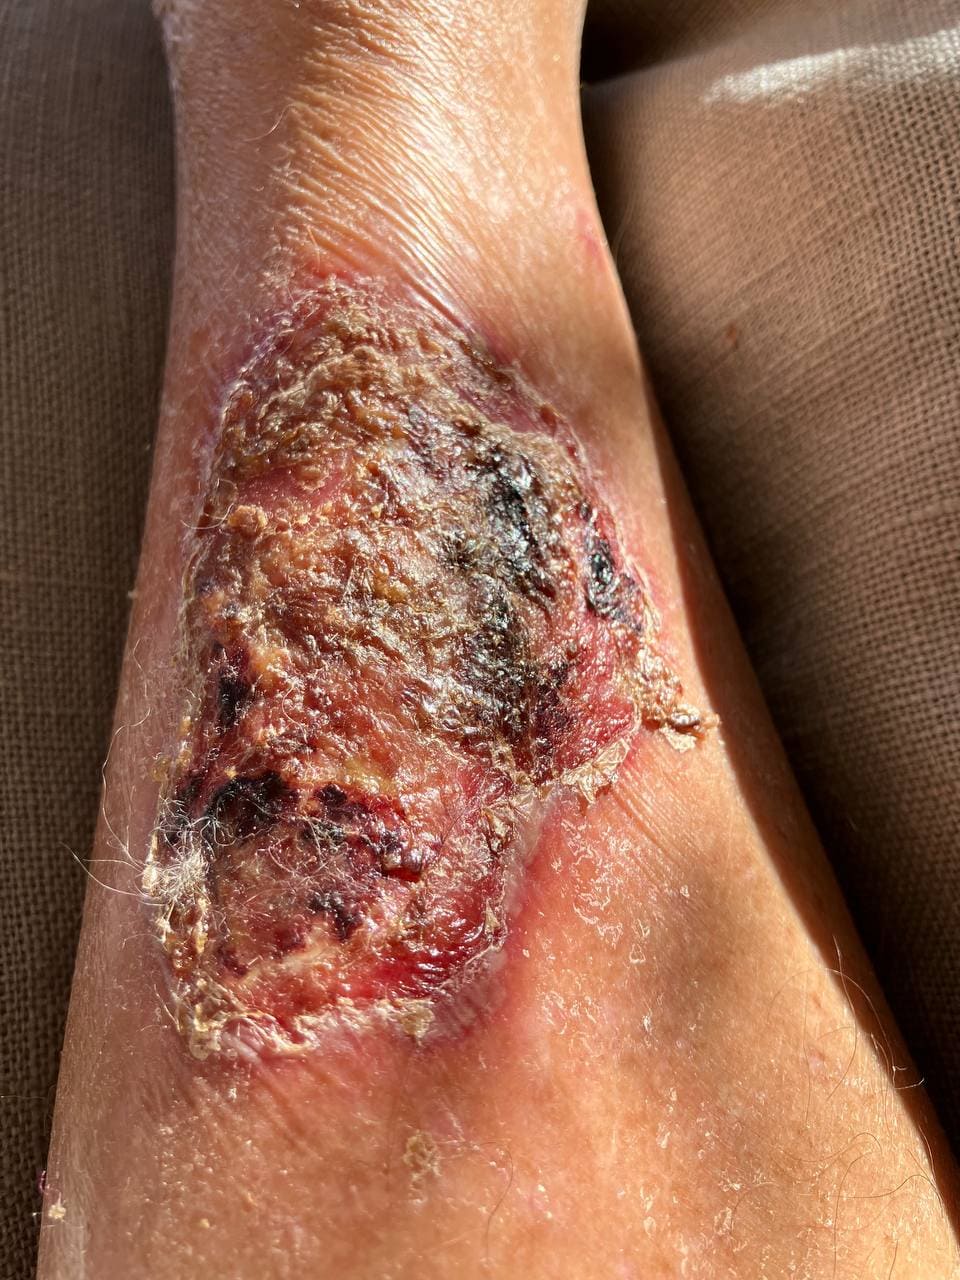 Leg ulcers: squamous epithelium and connective tissue in hanging healing